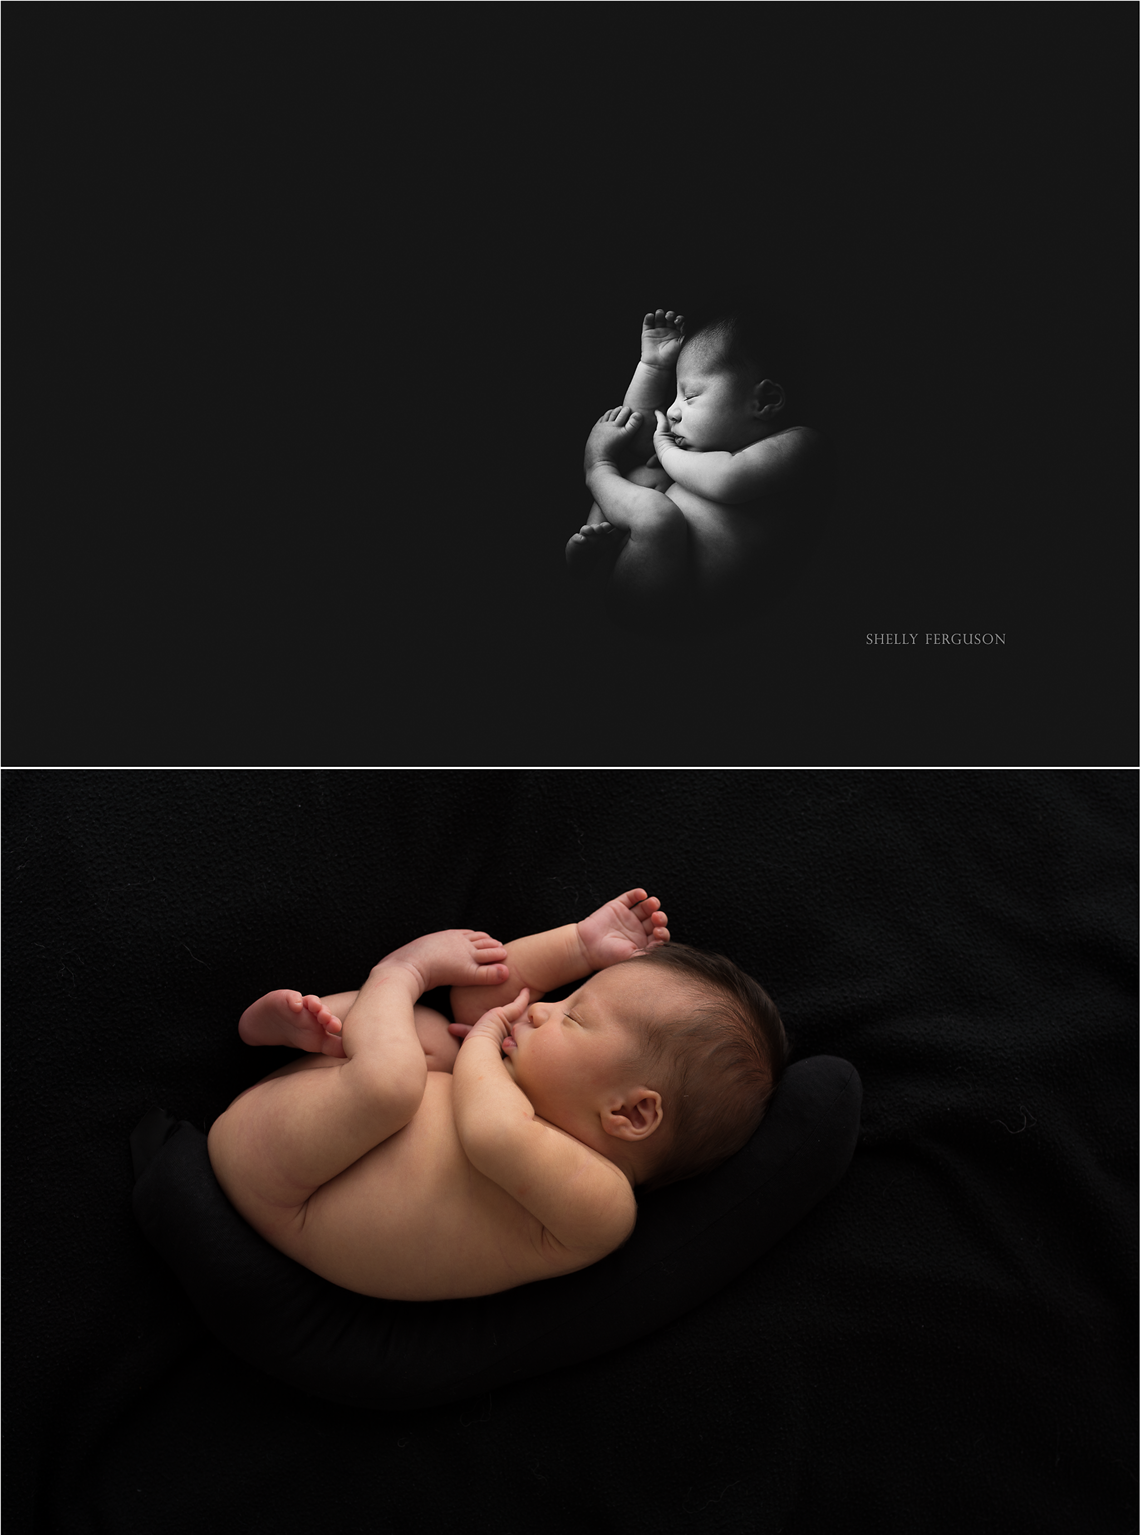 newborn photography community critique photo submitted by Shelly Ferguson - 2 community members set this photo as a favourite image.